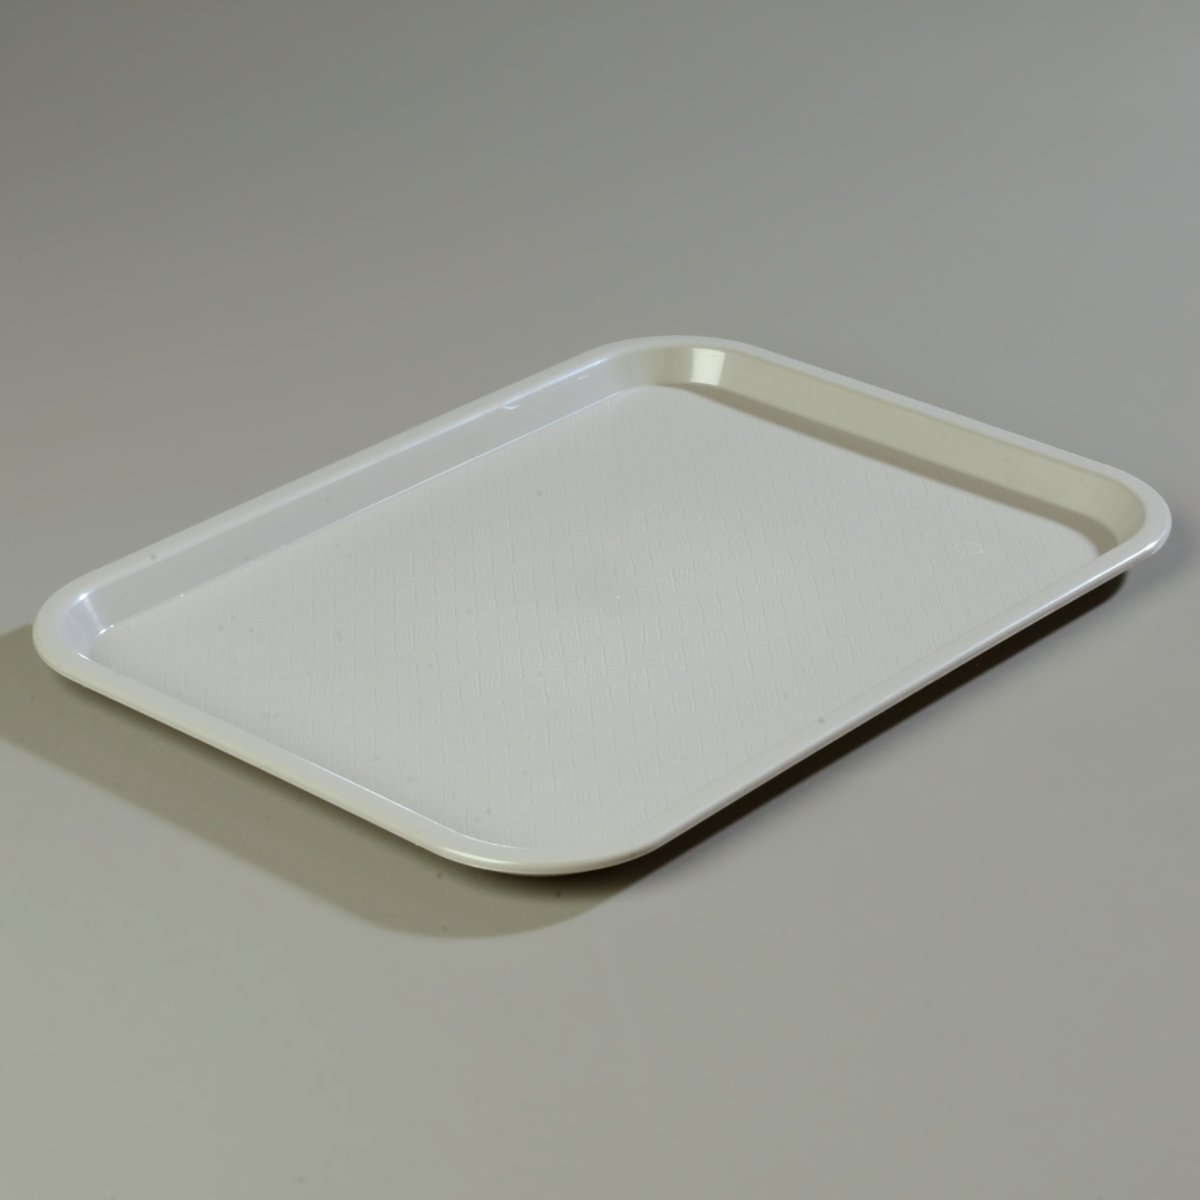 Carlisle FoodService Products CT121623 Café Standard Cafeteria / Fast Food Tray, 12" x 16", Gray